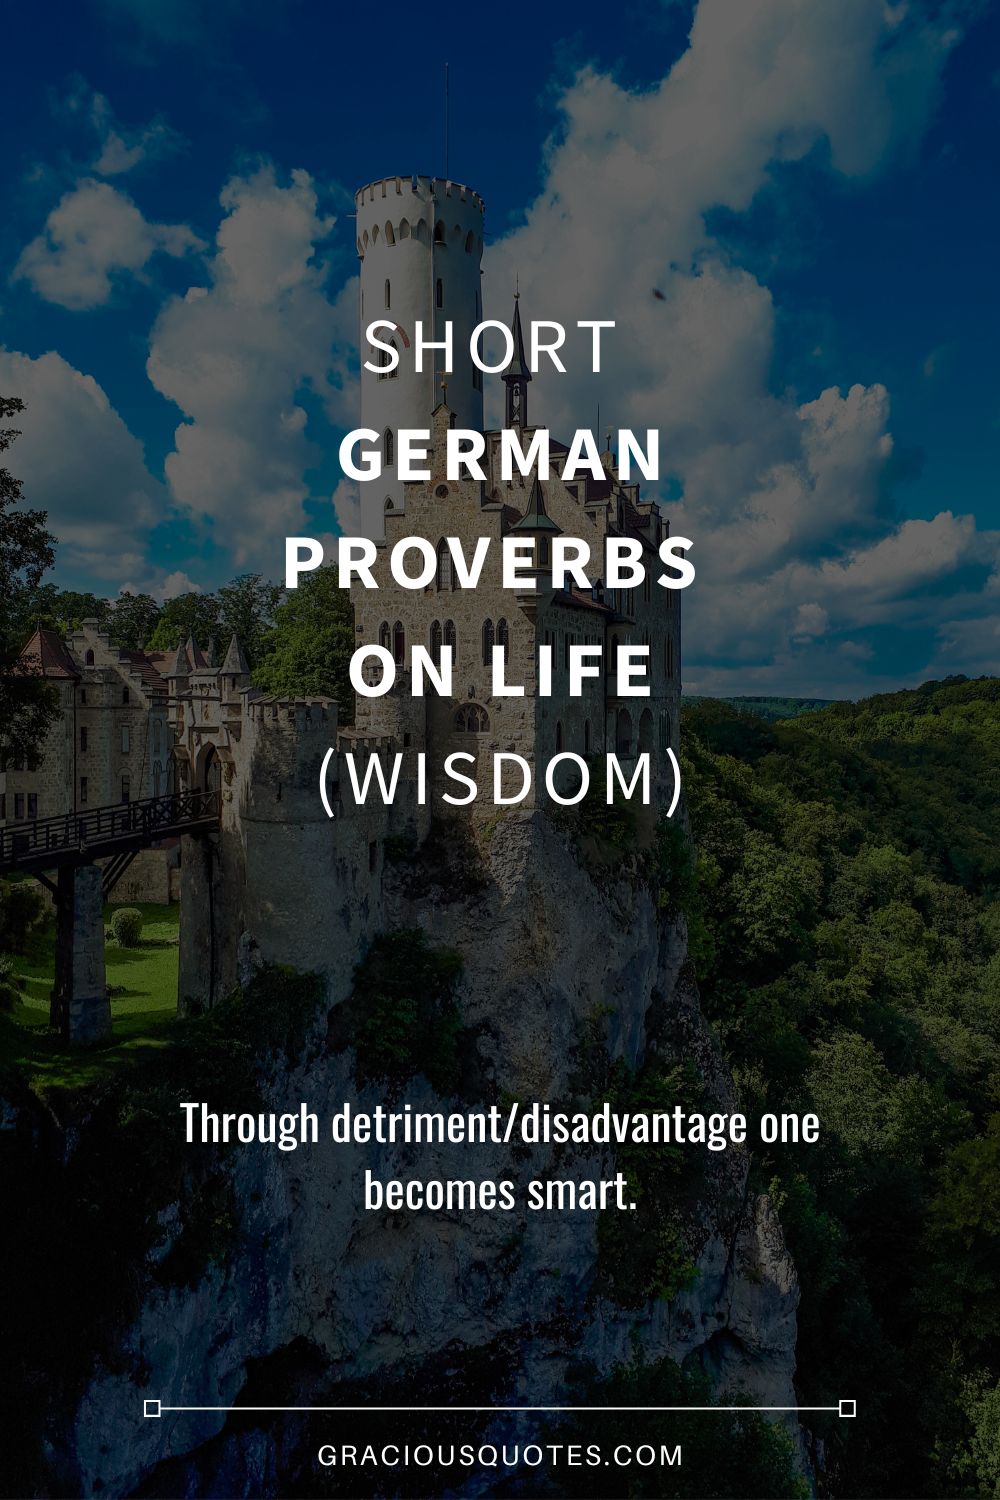 Short German Proverbs on Life (WISDOM) - Gracious Quotes